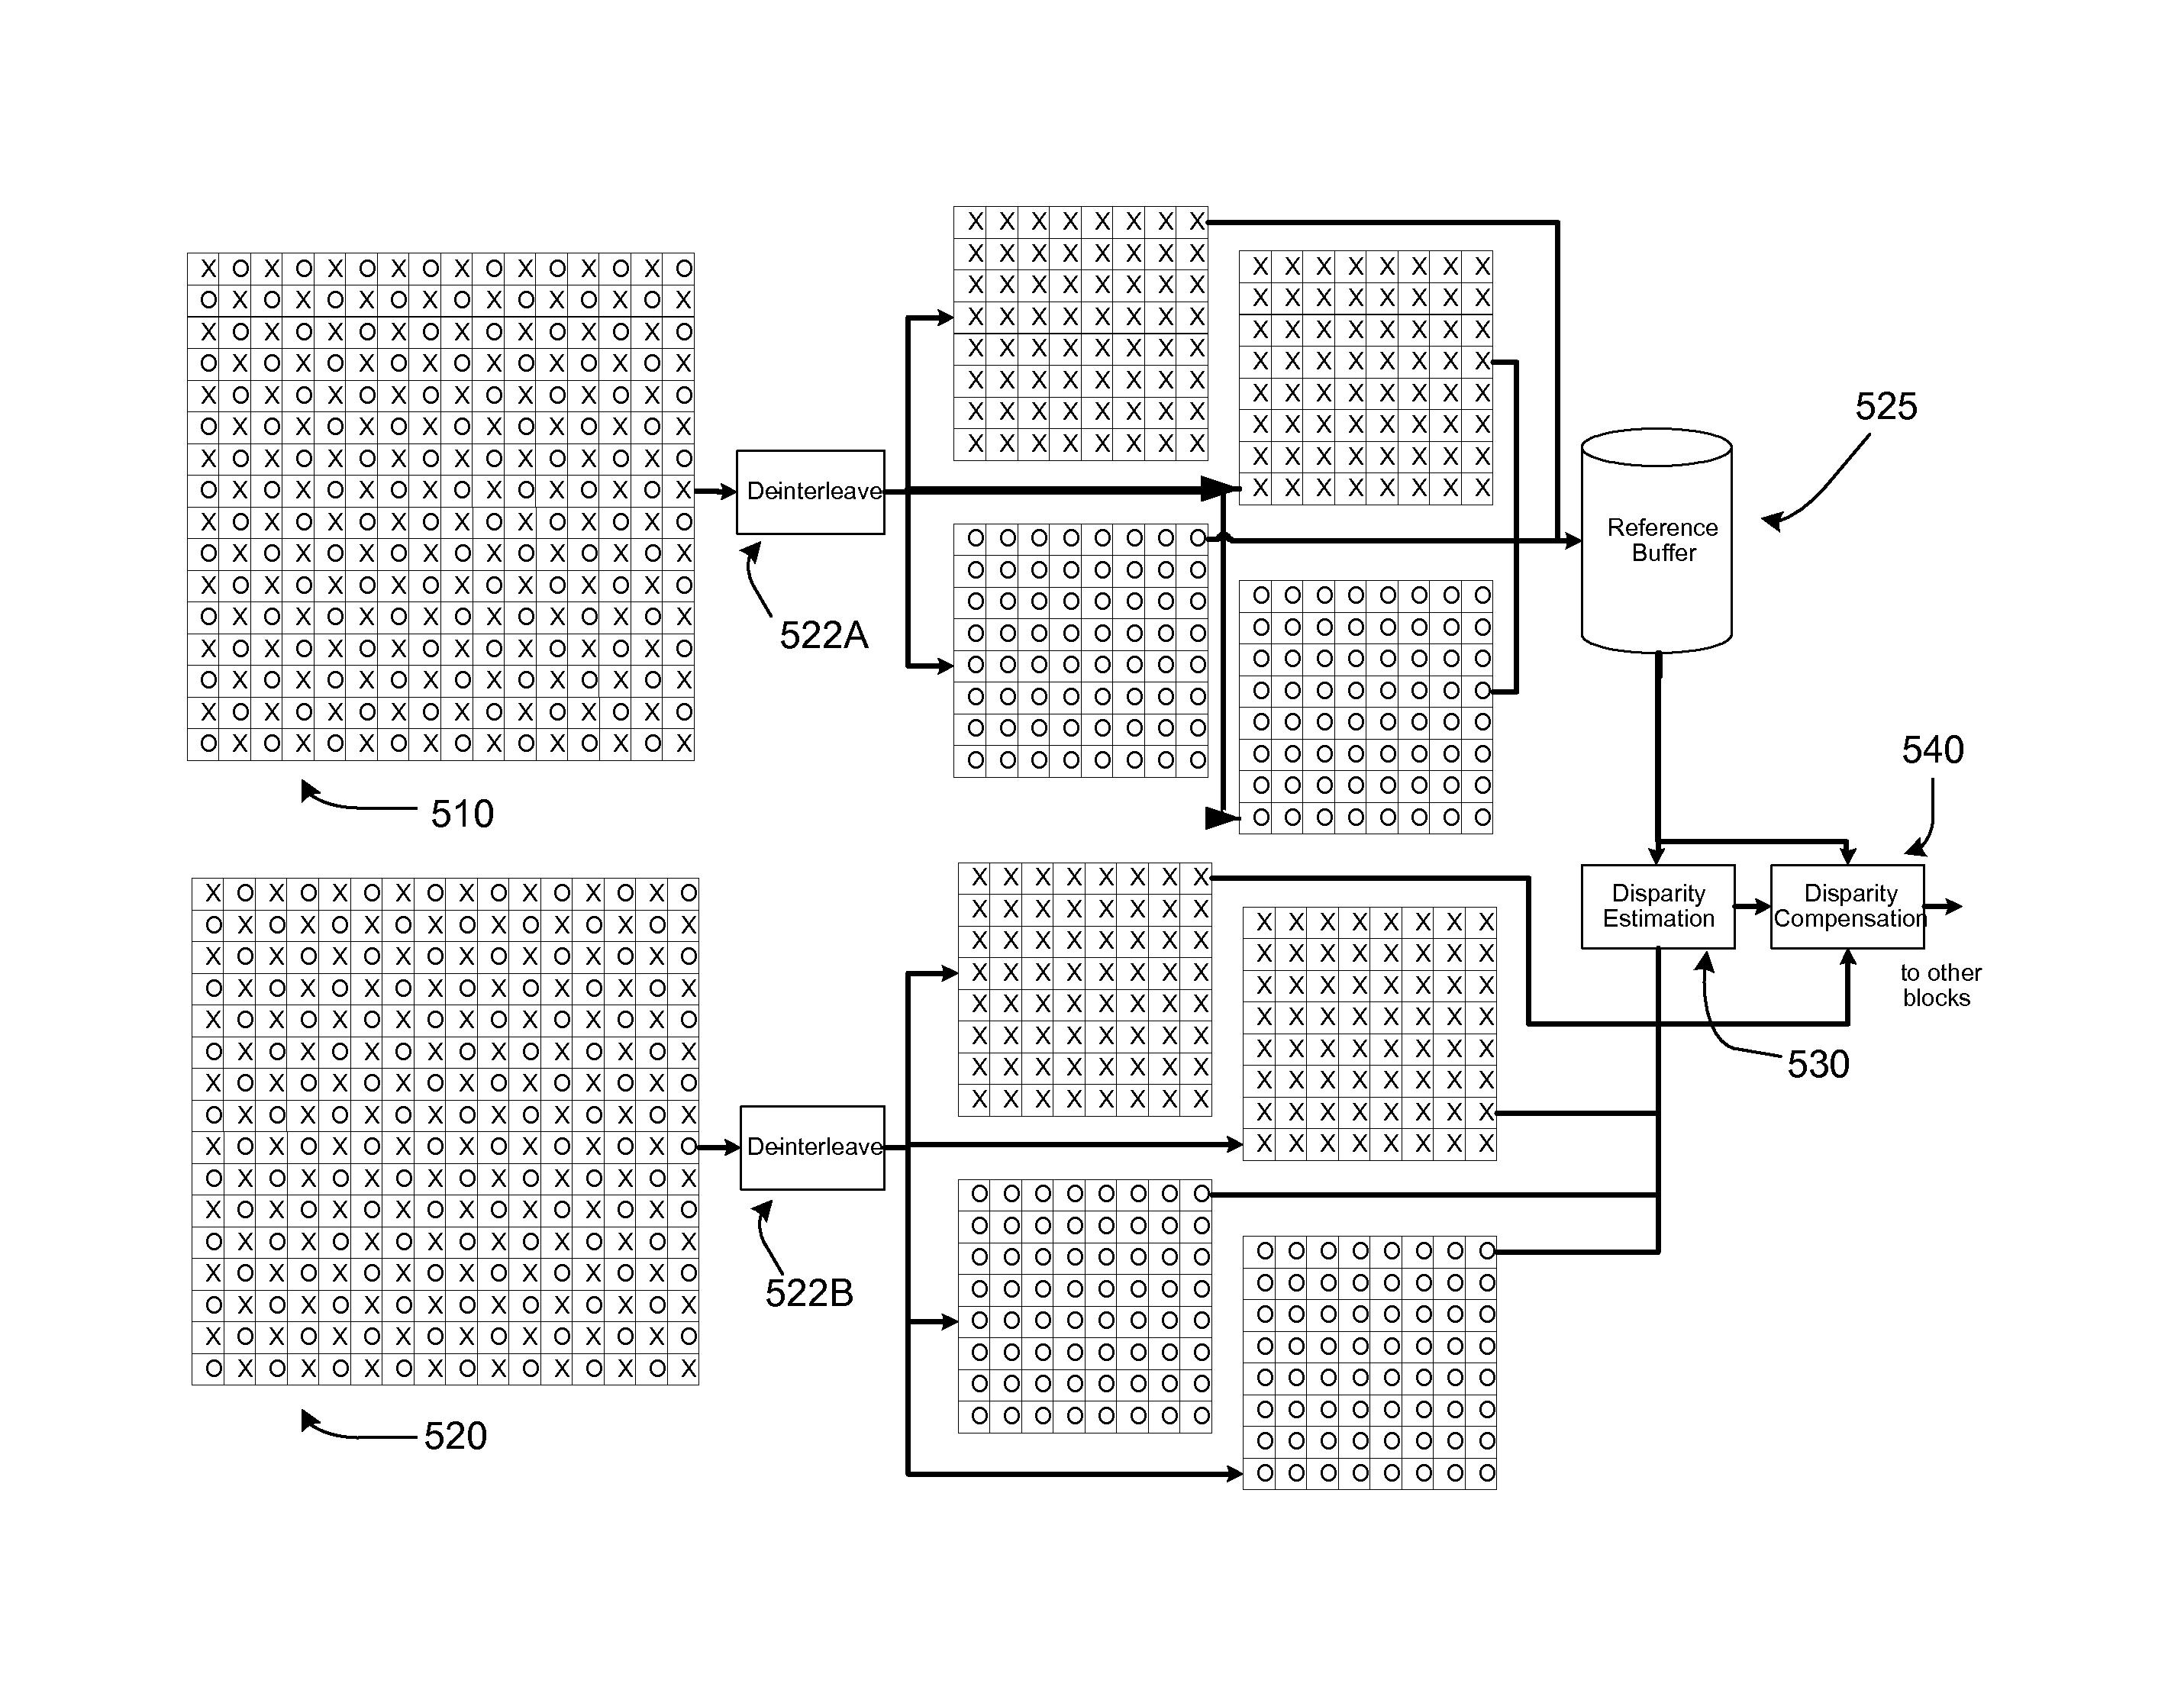 Encoding and decoding architecture of checkerboard multiplexed image data